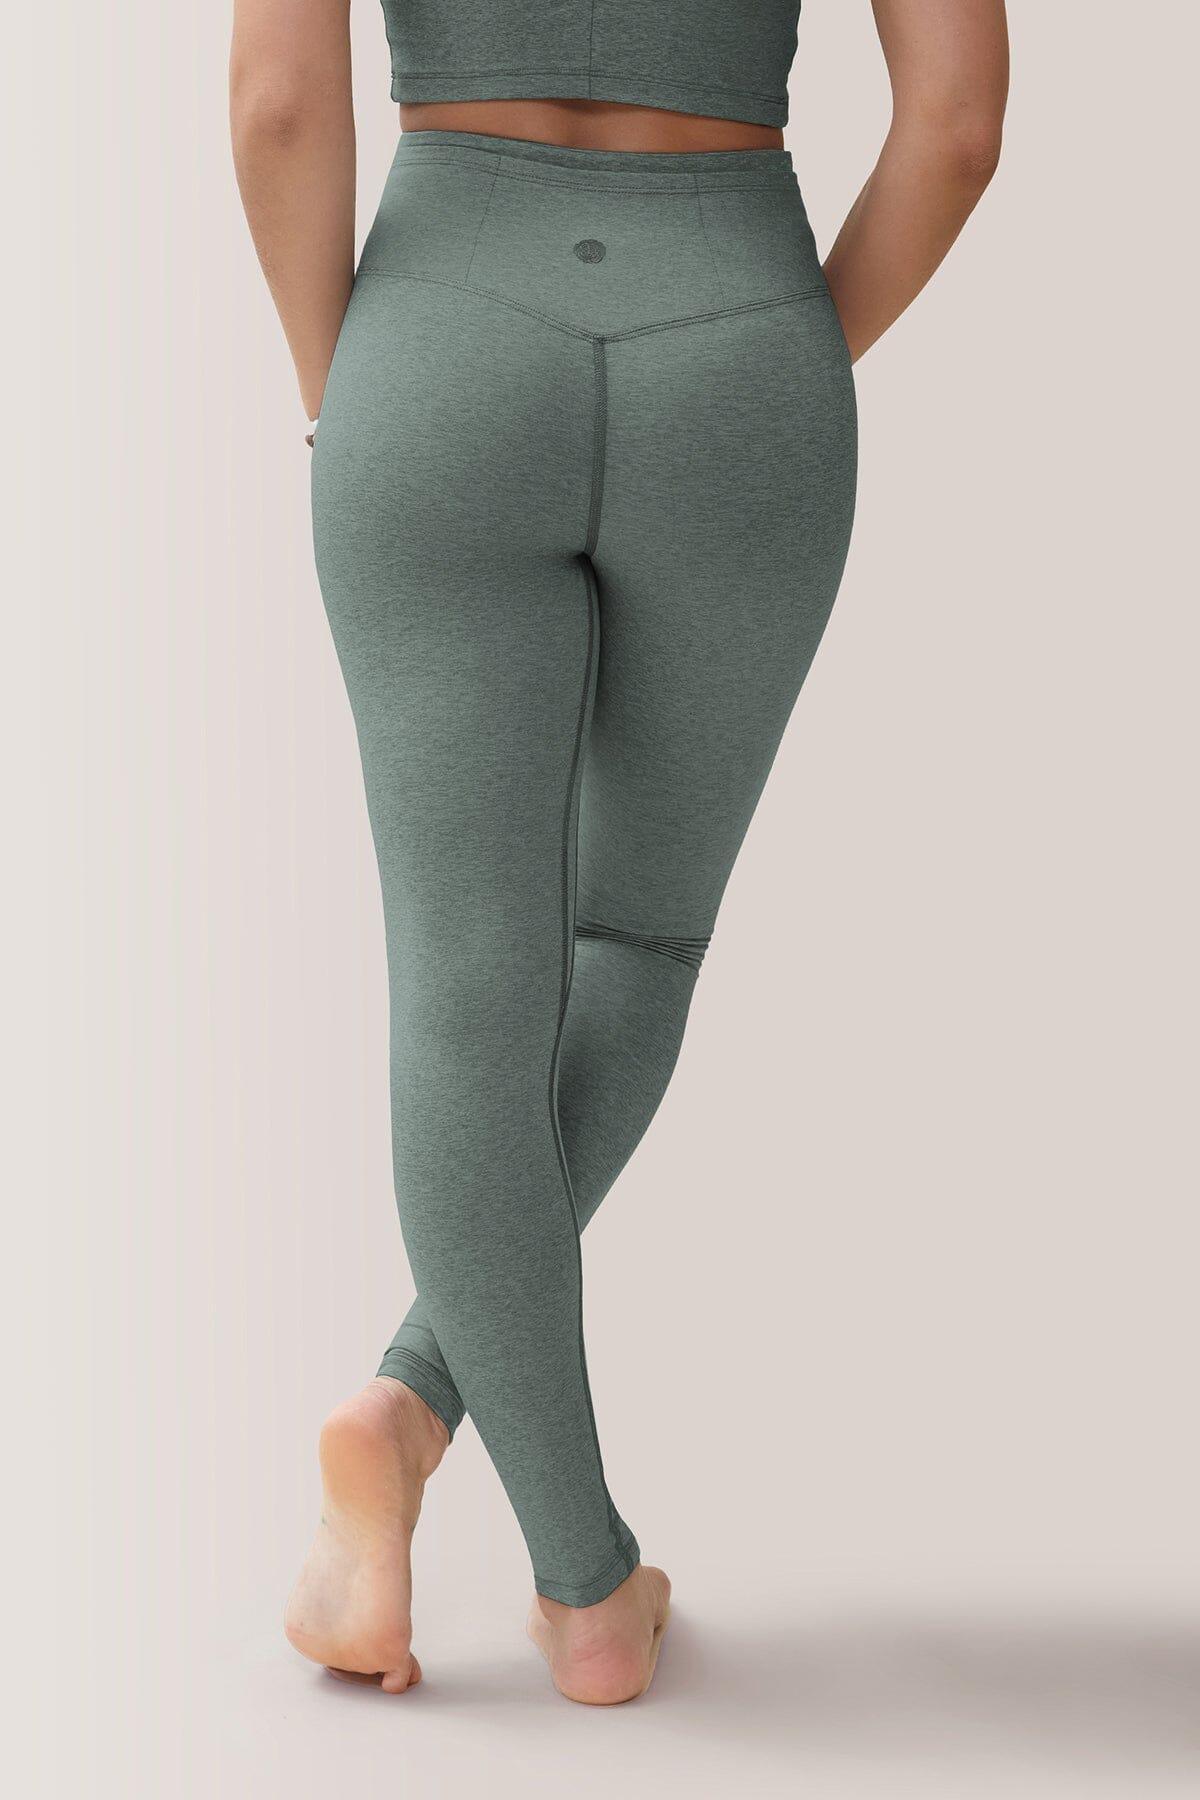 Femme qui porte les leggings taille-haute Buttery Soft BFF de Rose Boreal./ Womean wearing the Buttery Soft BFF High-Rise Legging from Rose Boreal. -Teal